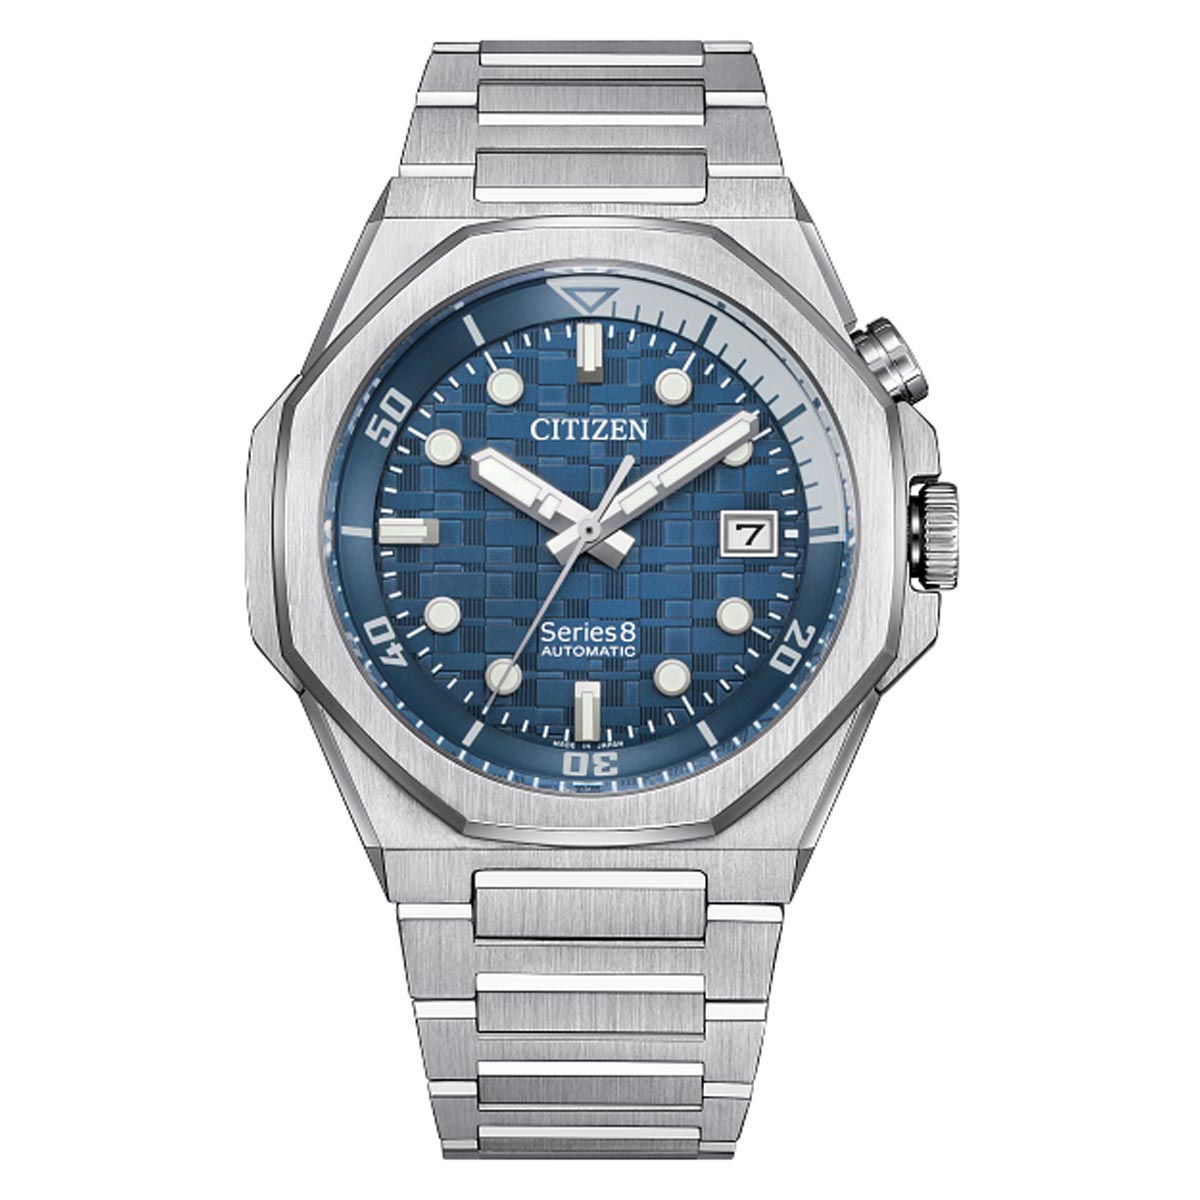 Citizen Series8 890 Mens Watch with Blue Dial and Stainless Steel Bracelet (automatic movement)